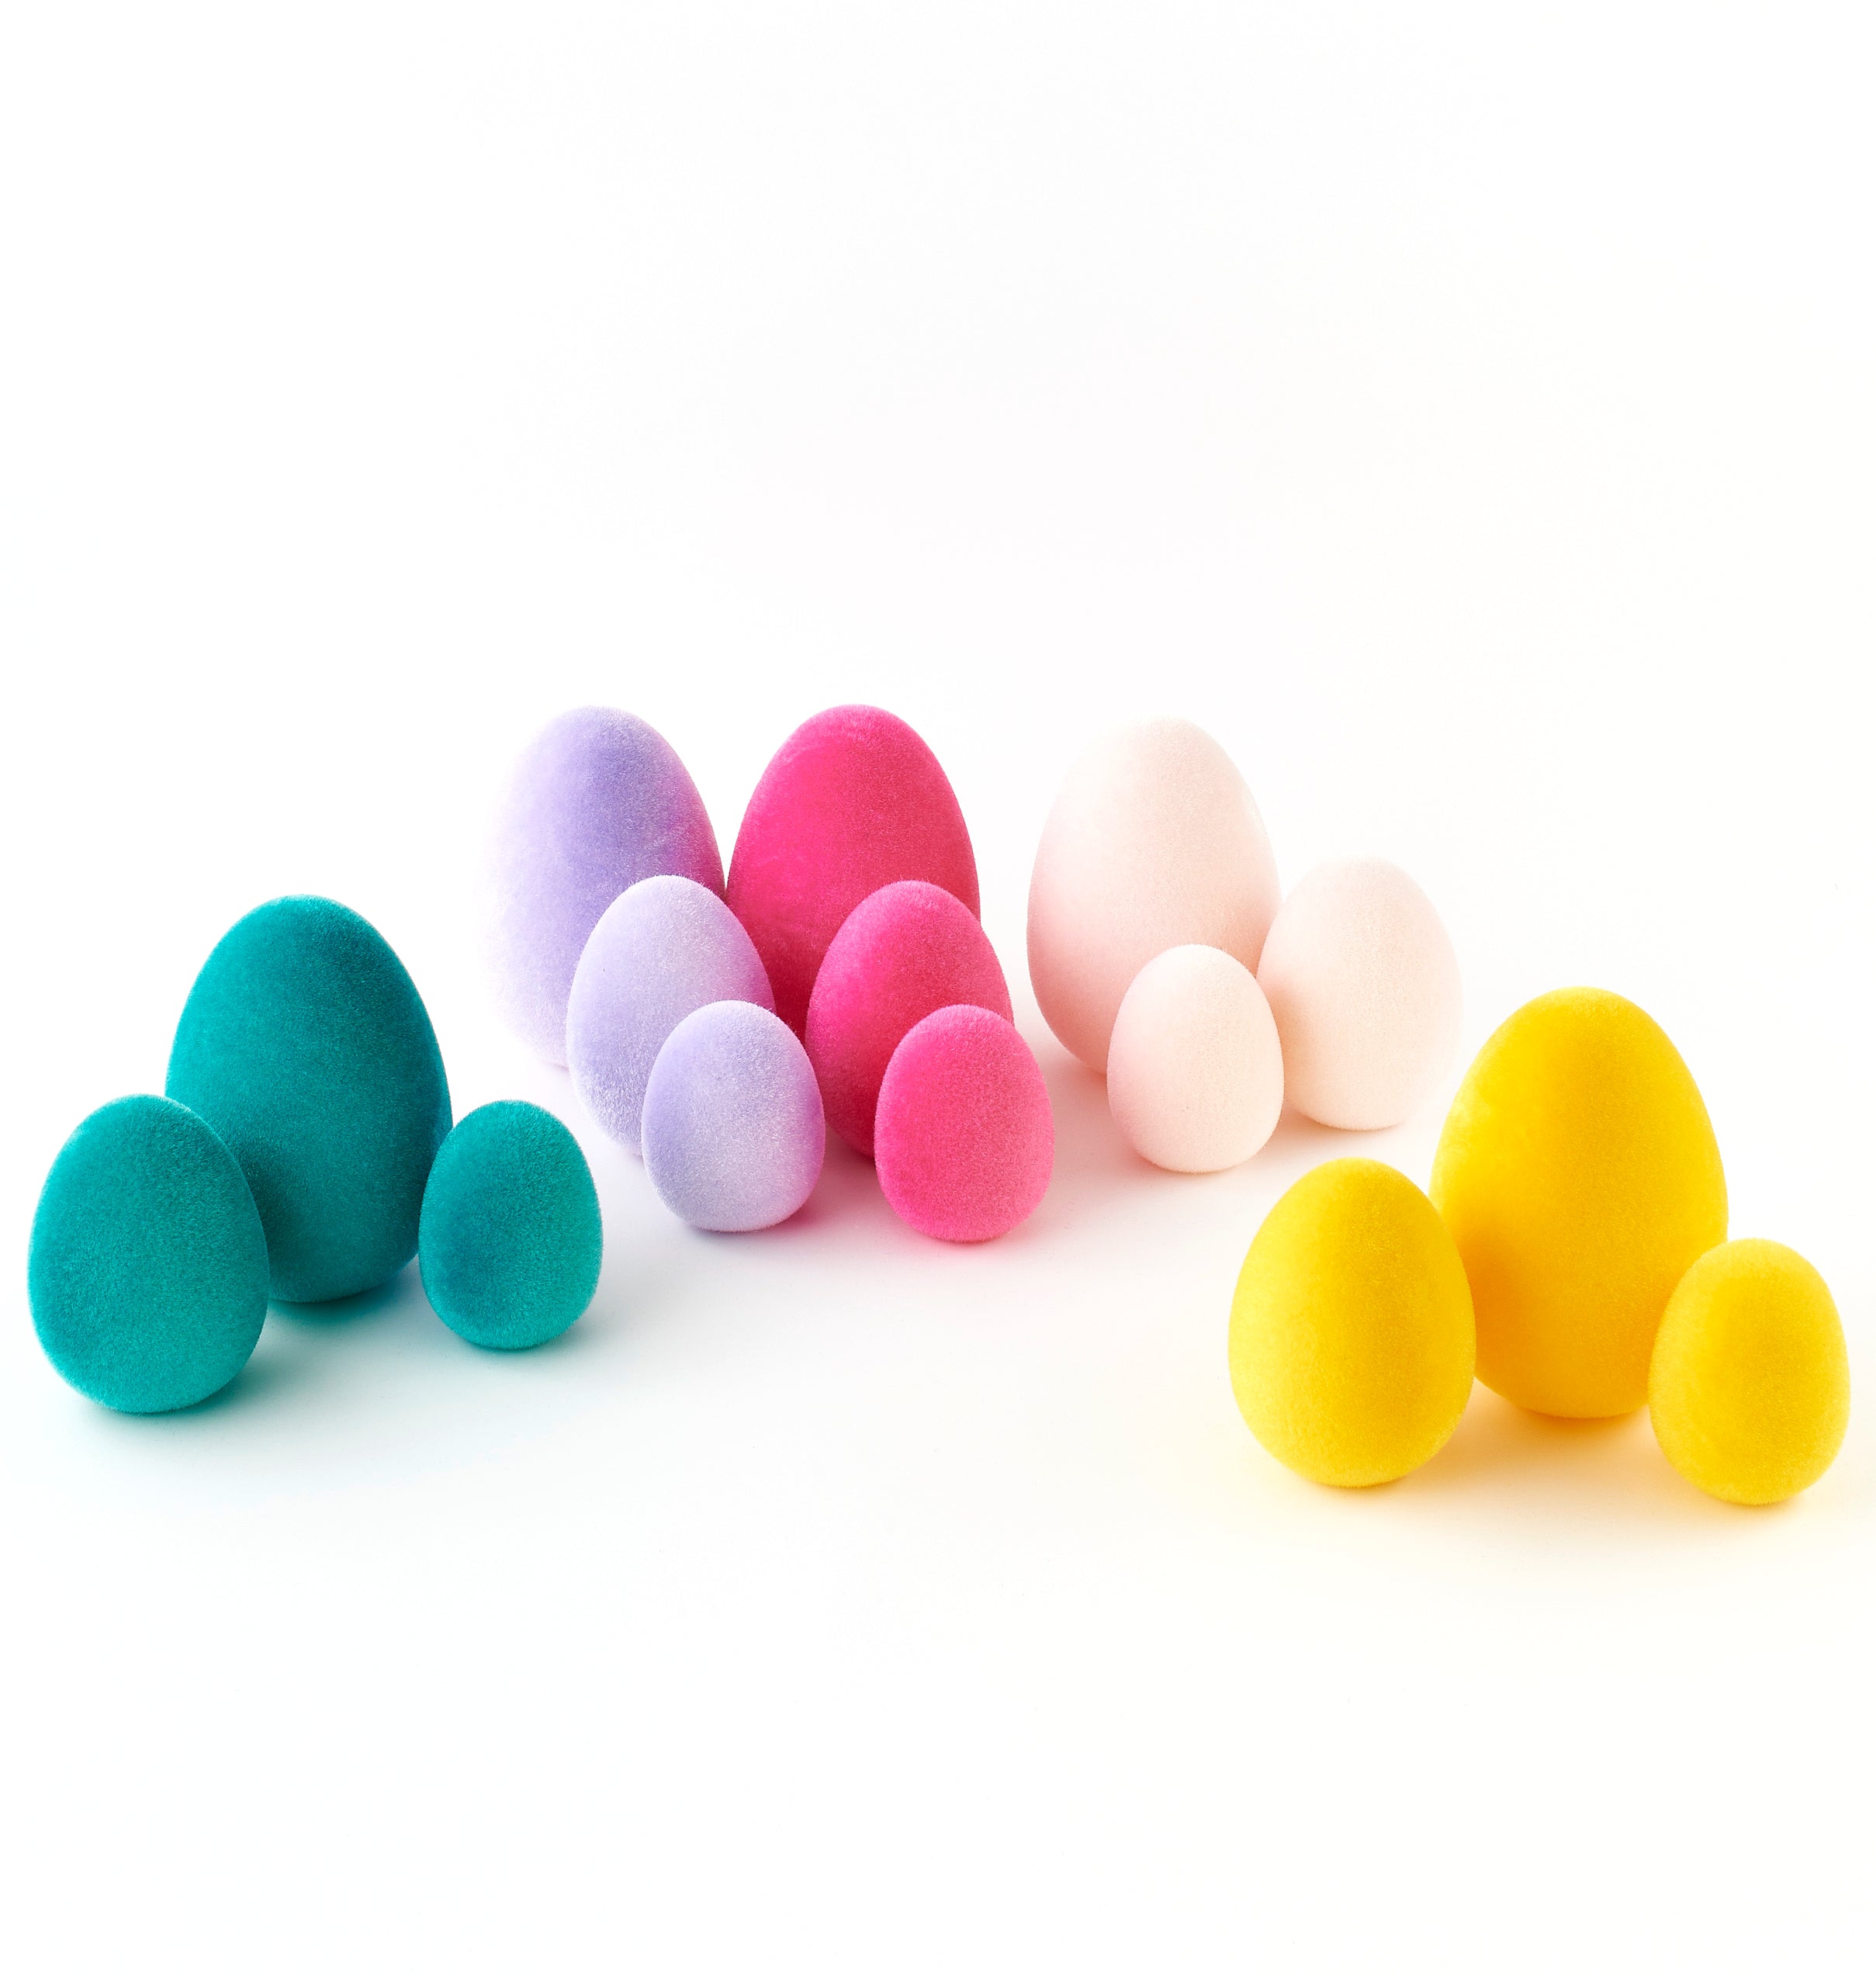 Colorful Flocked Easter Eggs, Display